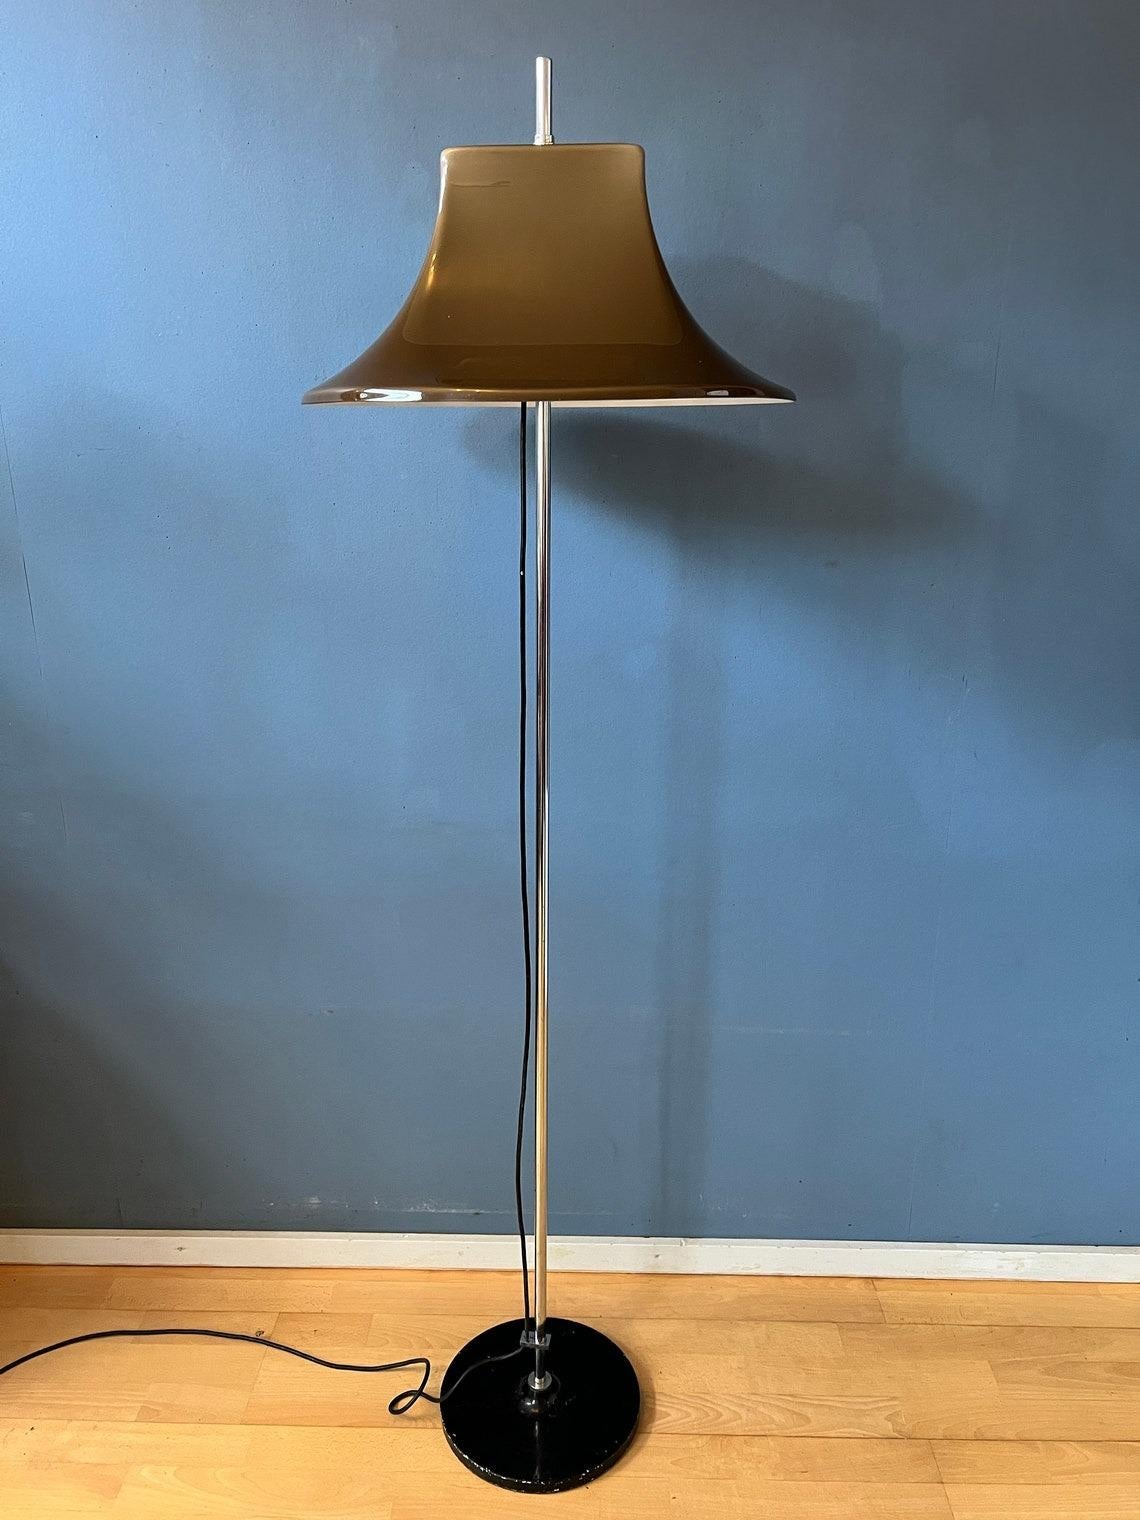 Metal Willem Hagoort Space Age Floor Lamp with Beige Witch Hat Shade, 1970s For Sale